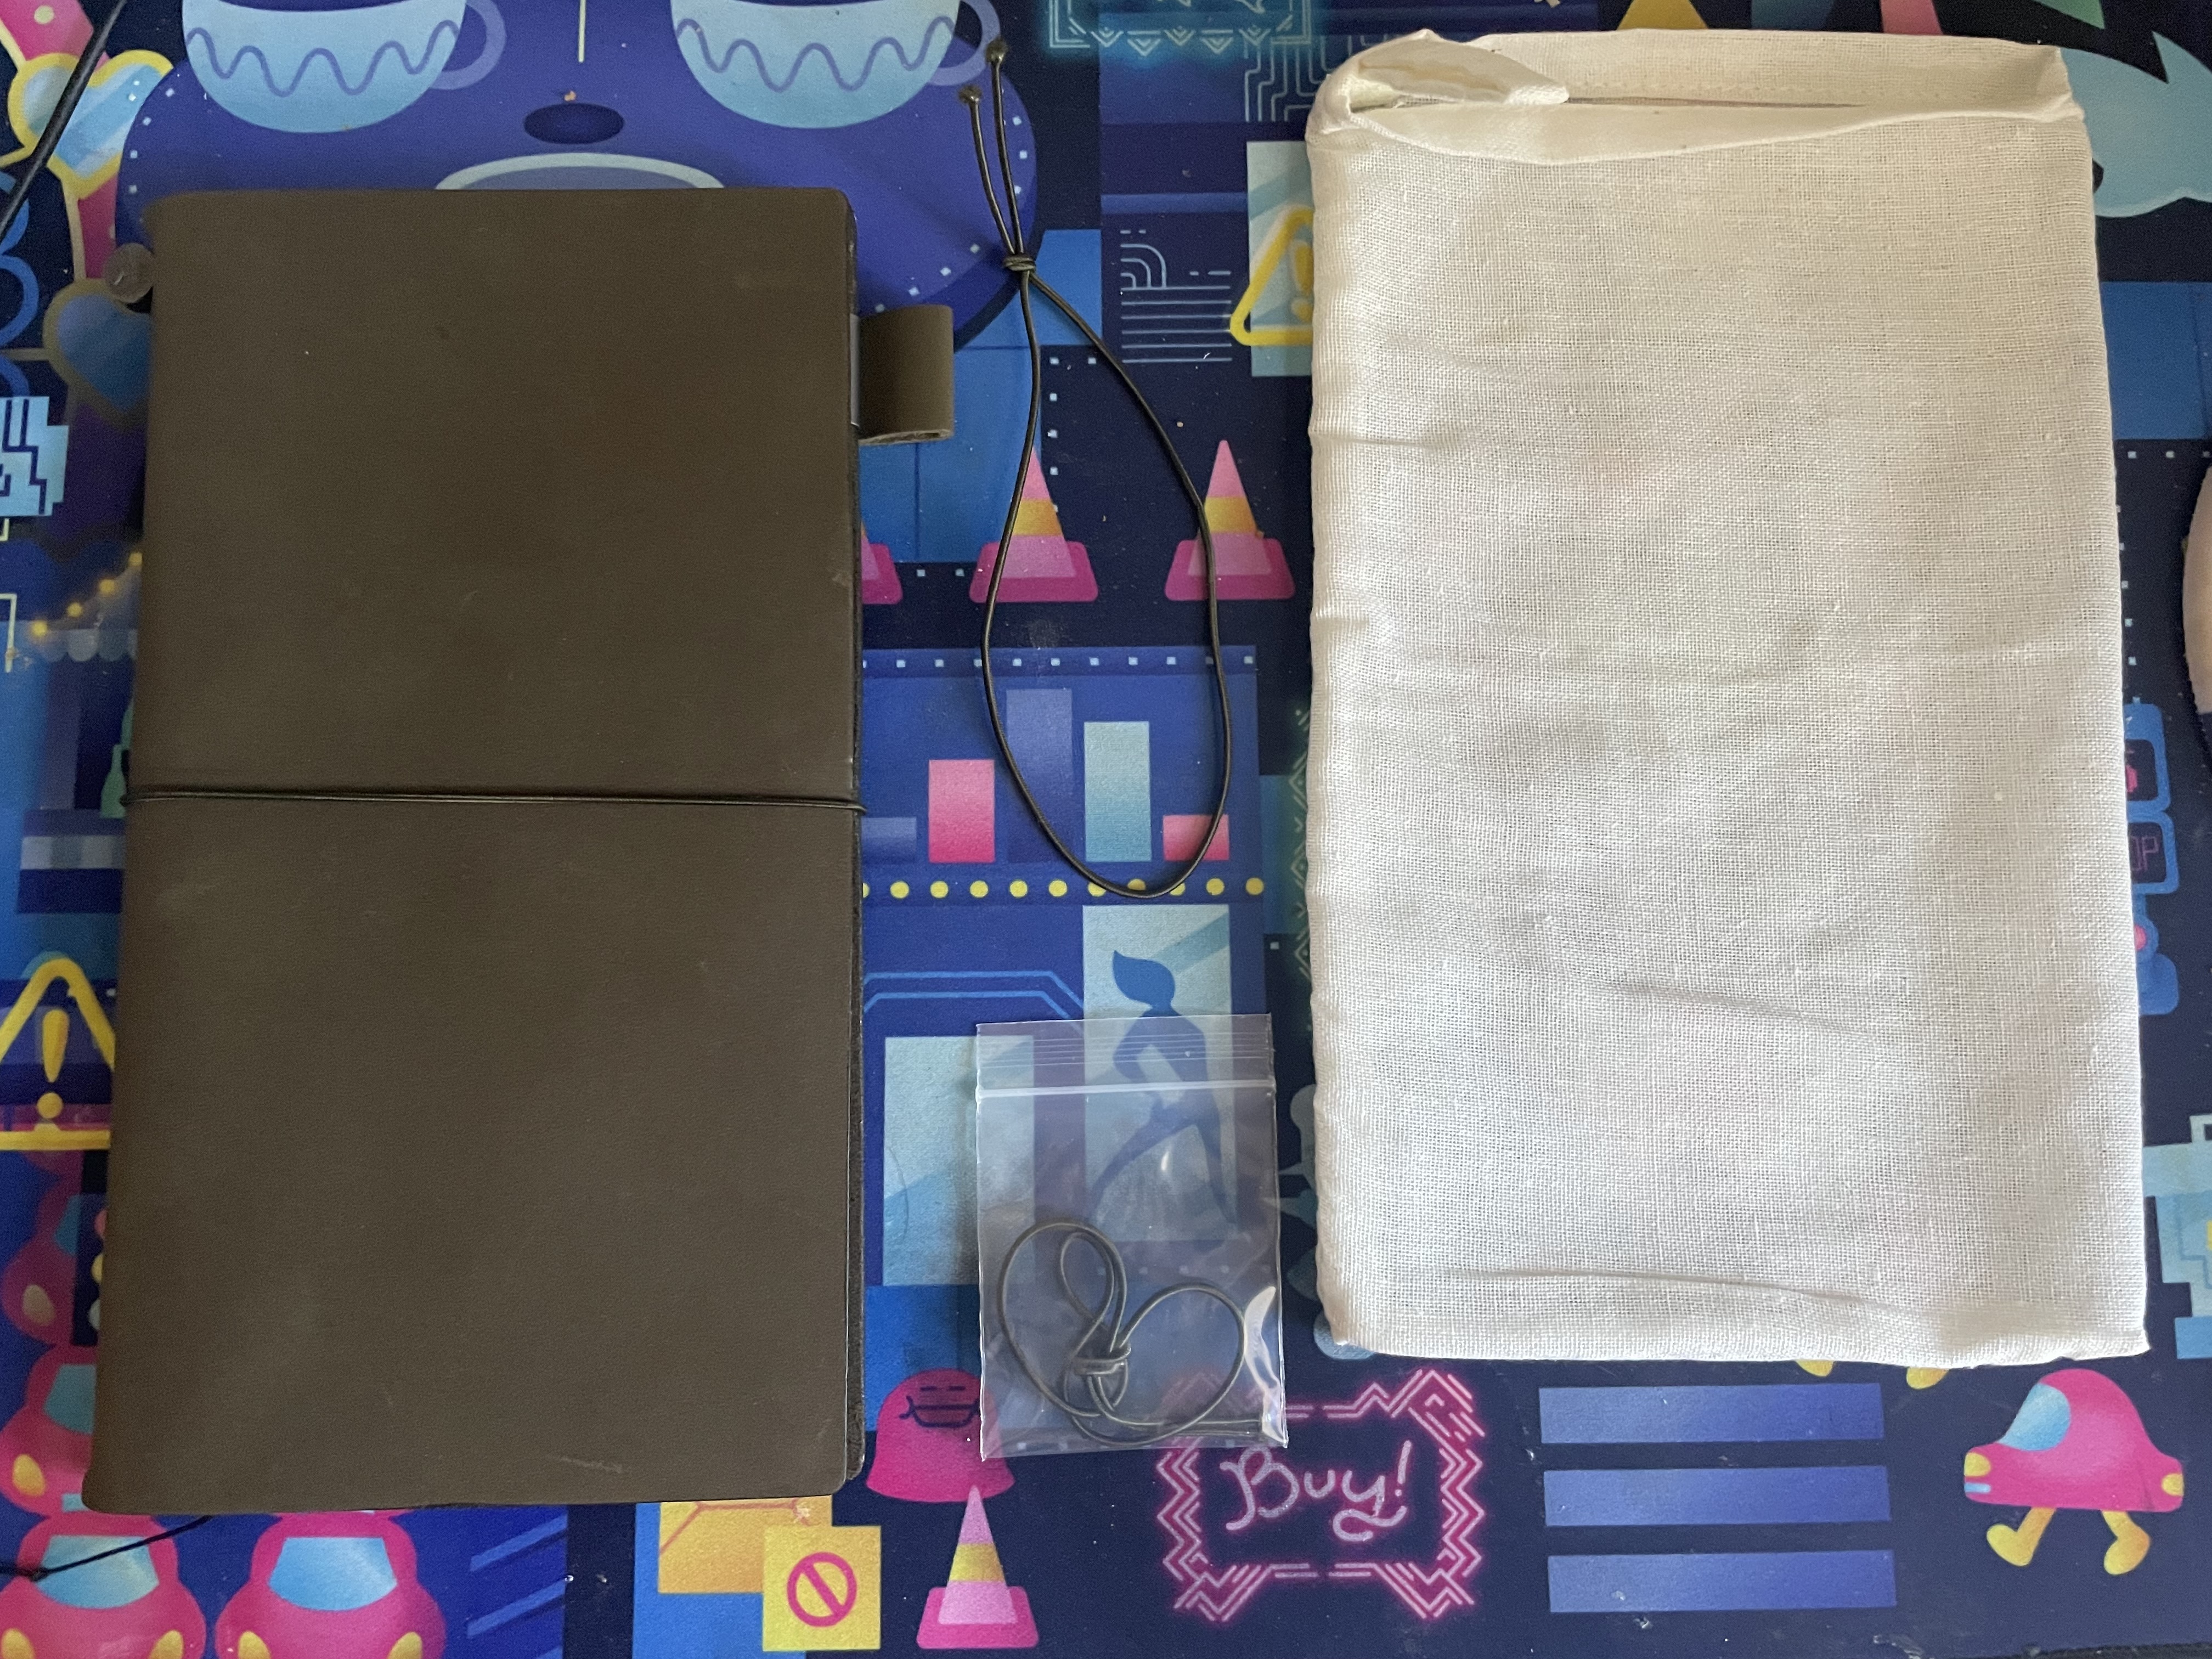 the contents of the olive traveler's notebook package: the notebook cover, a spare elastic, a cotton bag, and an additional elastic that kept the package together